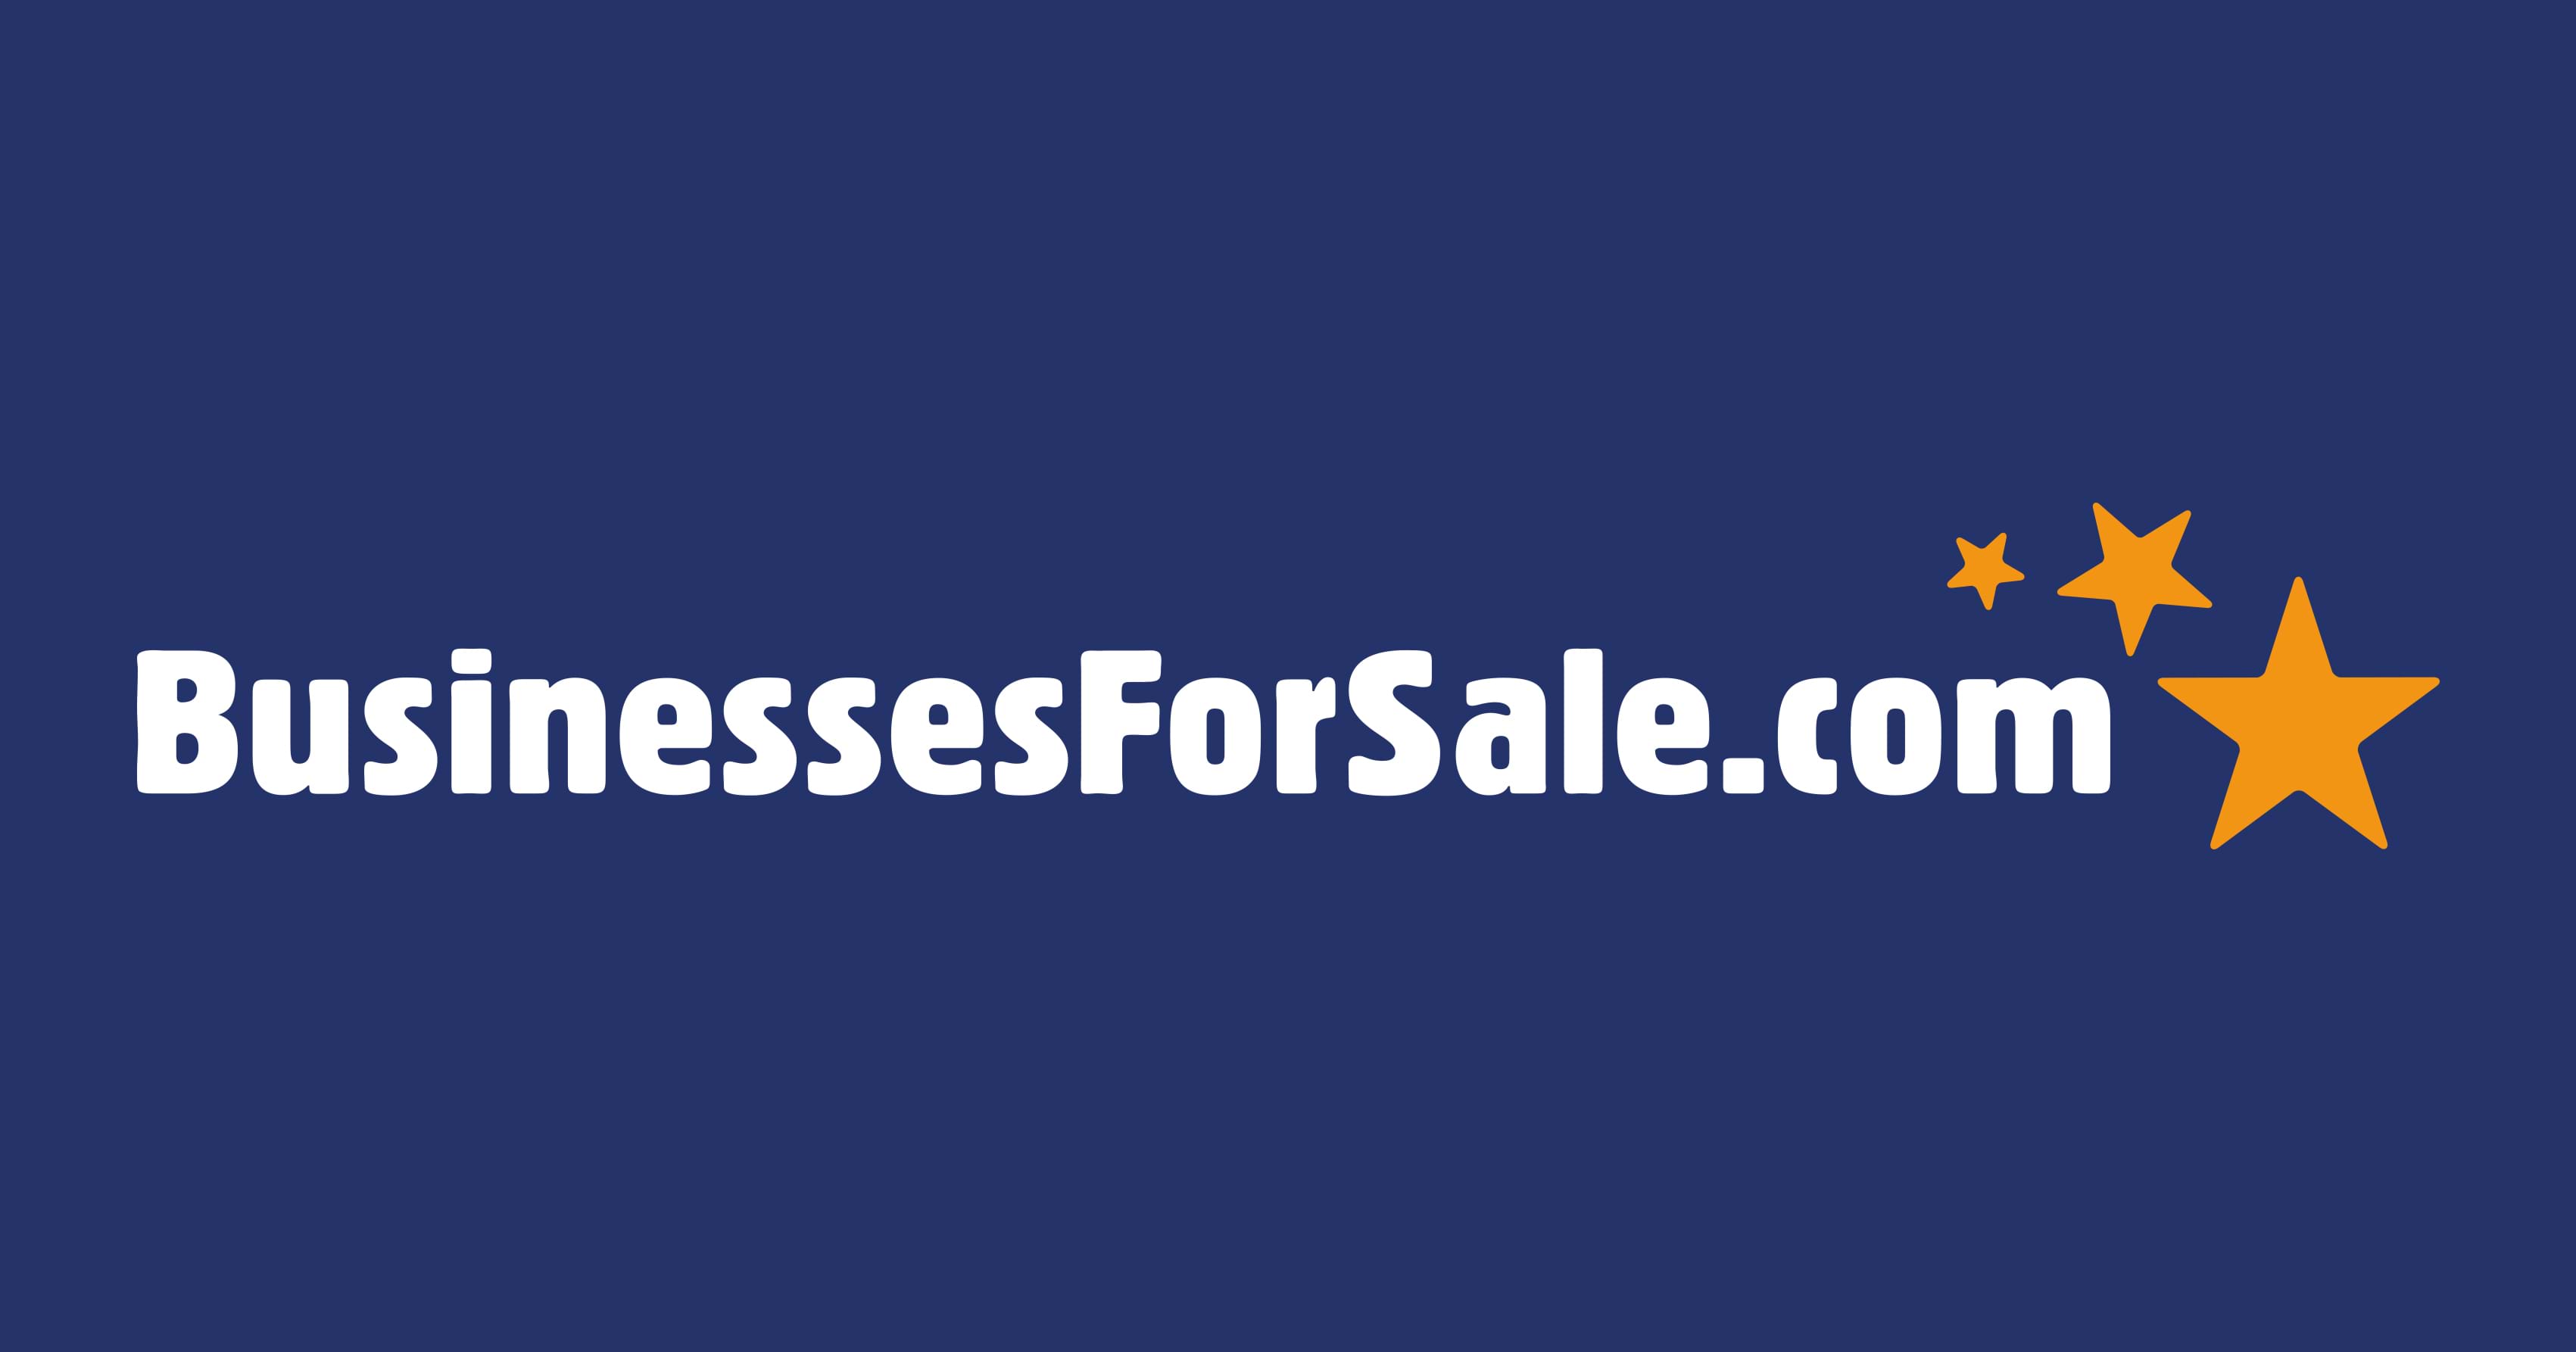 The Worldwide's Number One Business For Sale Website - BusinessesForSale.com